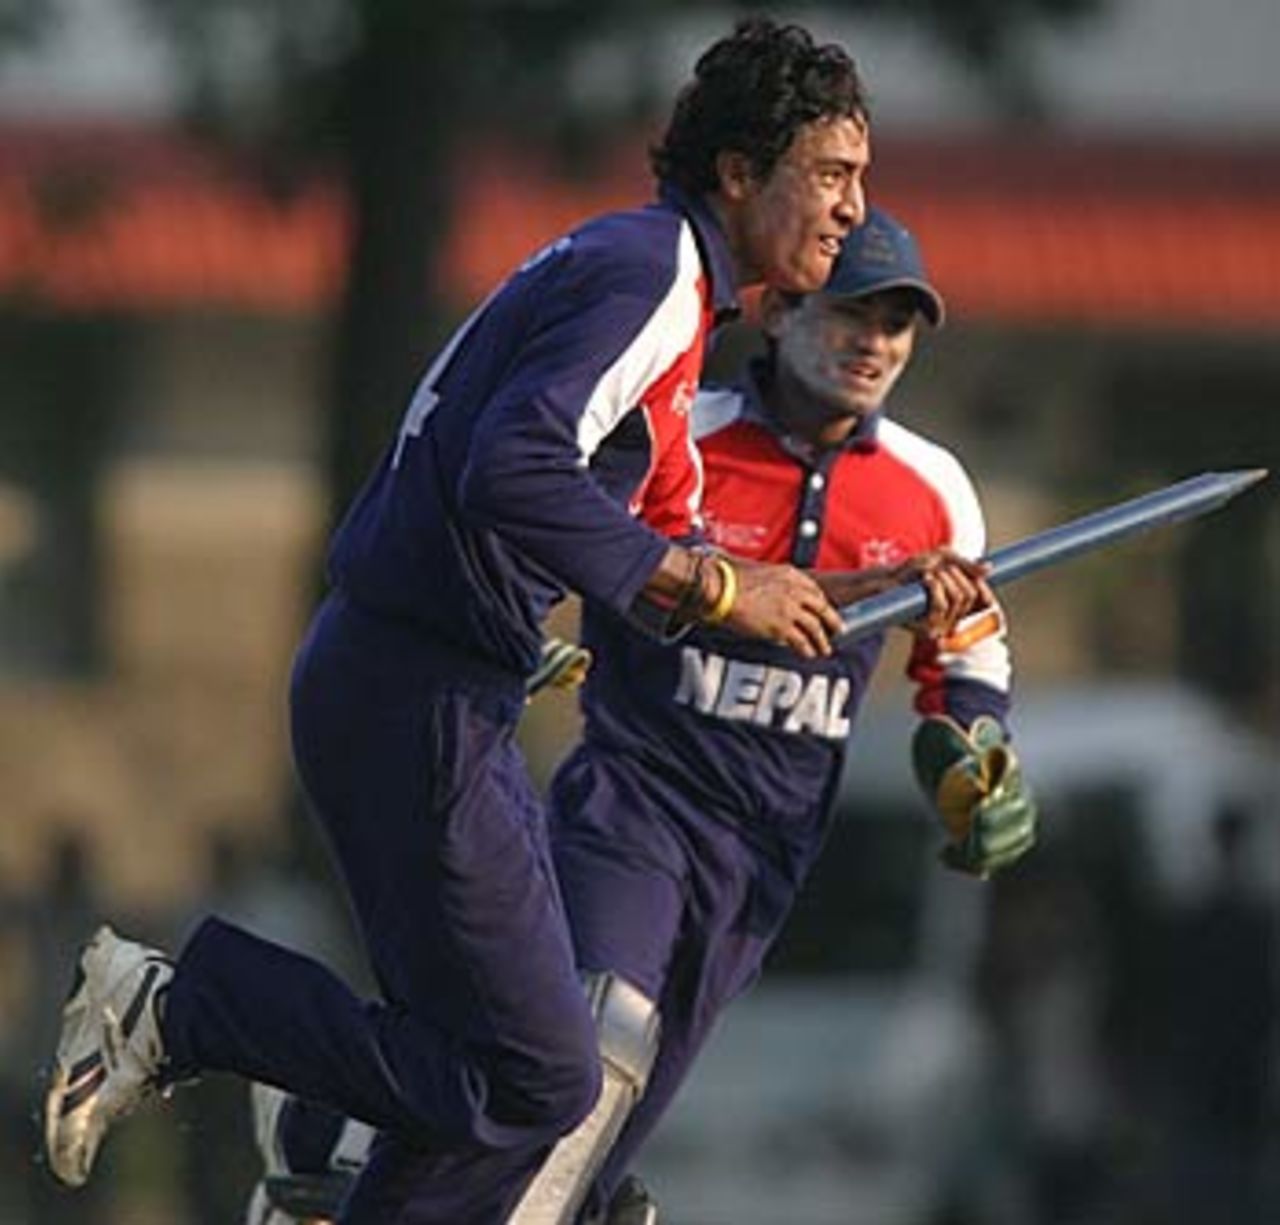 Paras Khadka and Mahesh Chhetri sprint from the field complete with souvenir stump, Nepal v South Africa, Under-19 World Cup, February 16, 2006